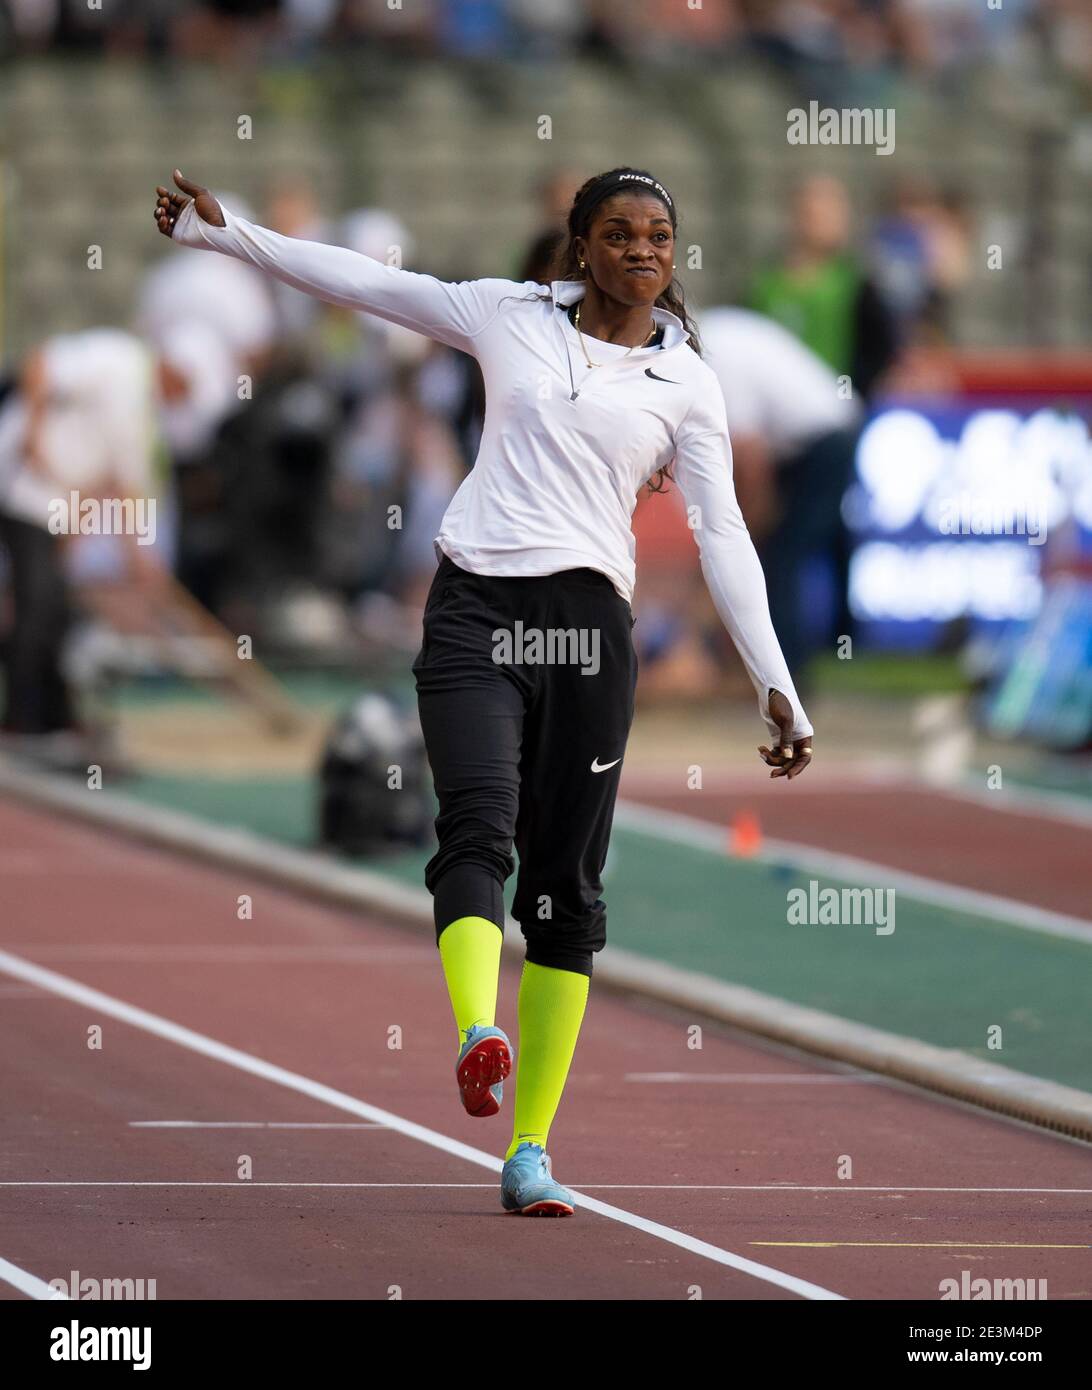 Catherine Ibarguen Colombia During Iaaf Diamond League At King Baudouin Stadium In Brussels Stock Photo Alamy